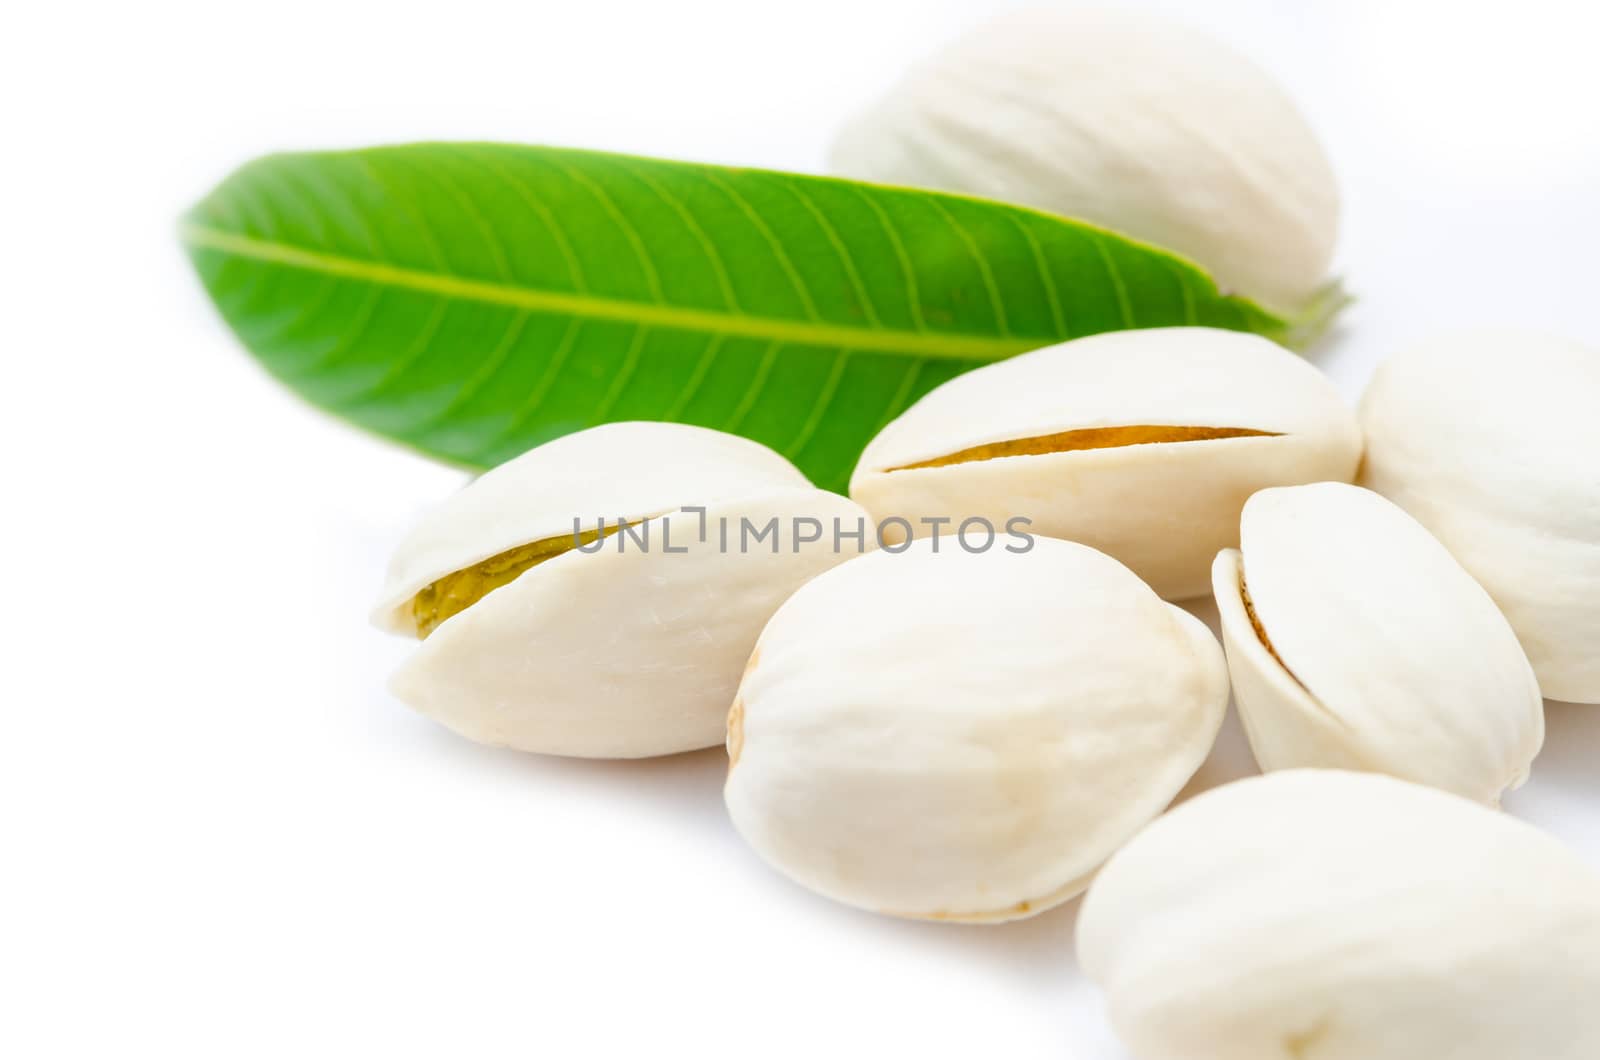 Pistachio nuts, fruits and green leaf isolated on white background